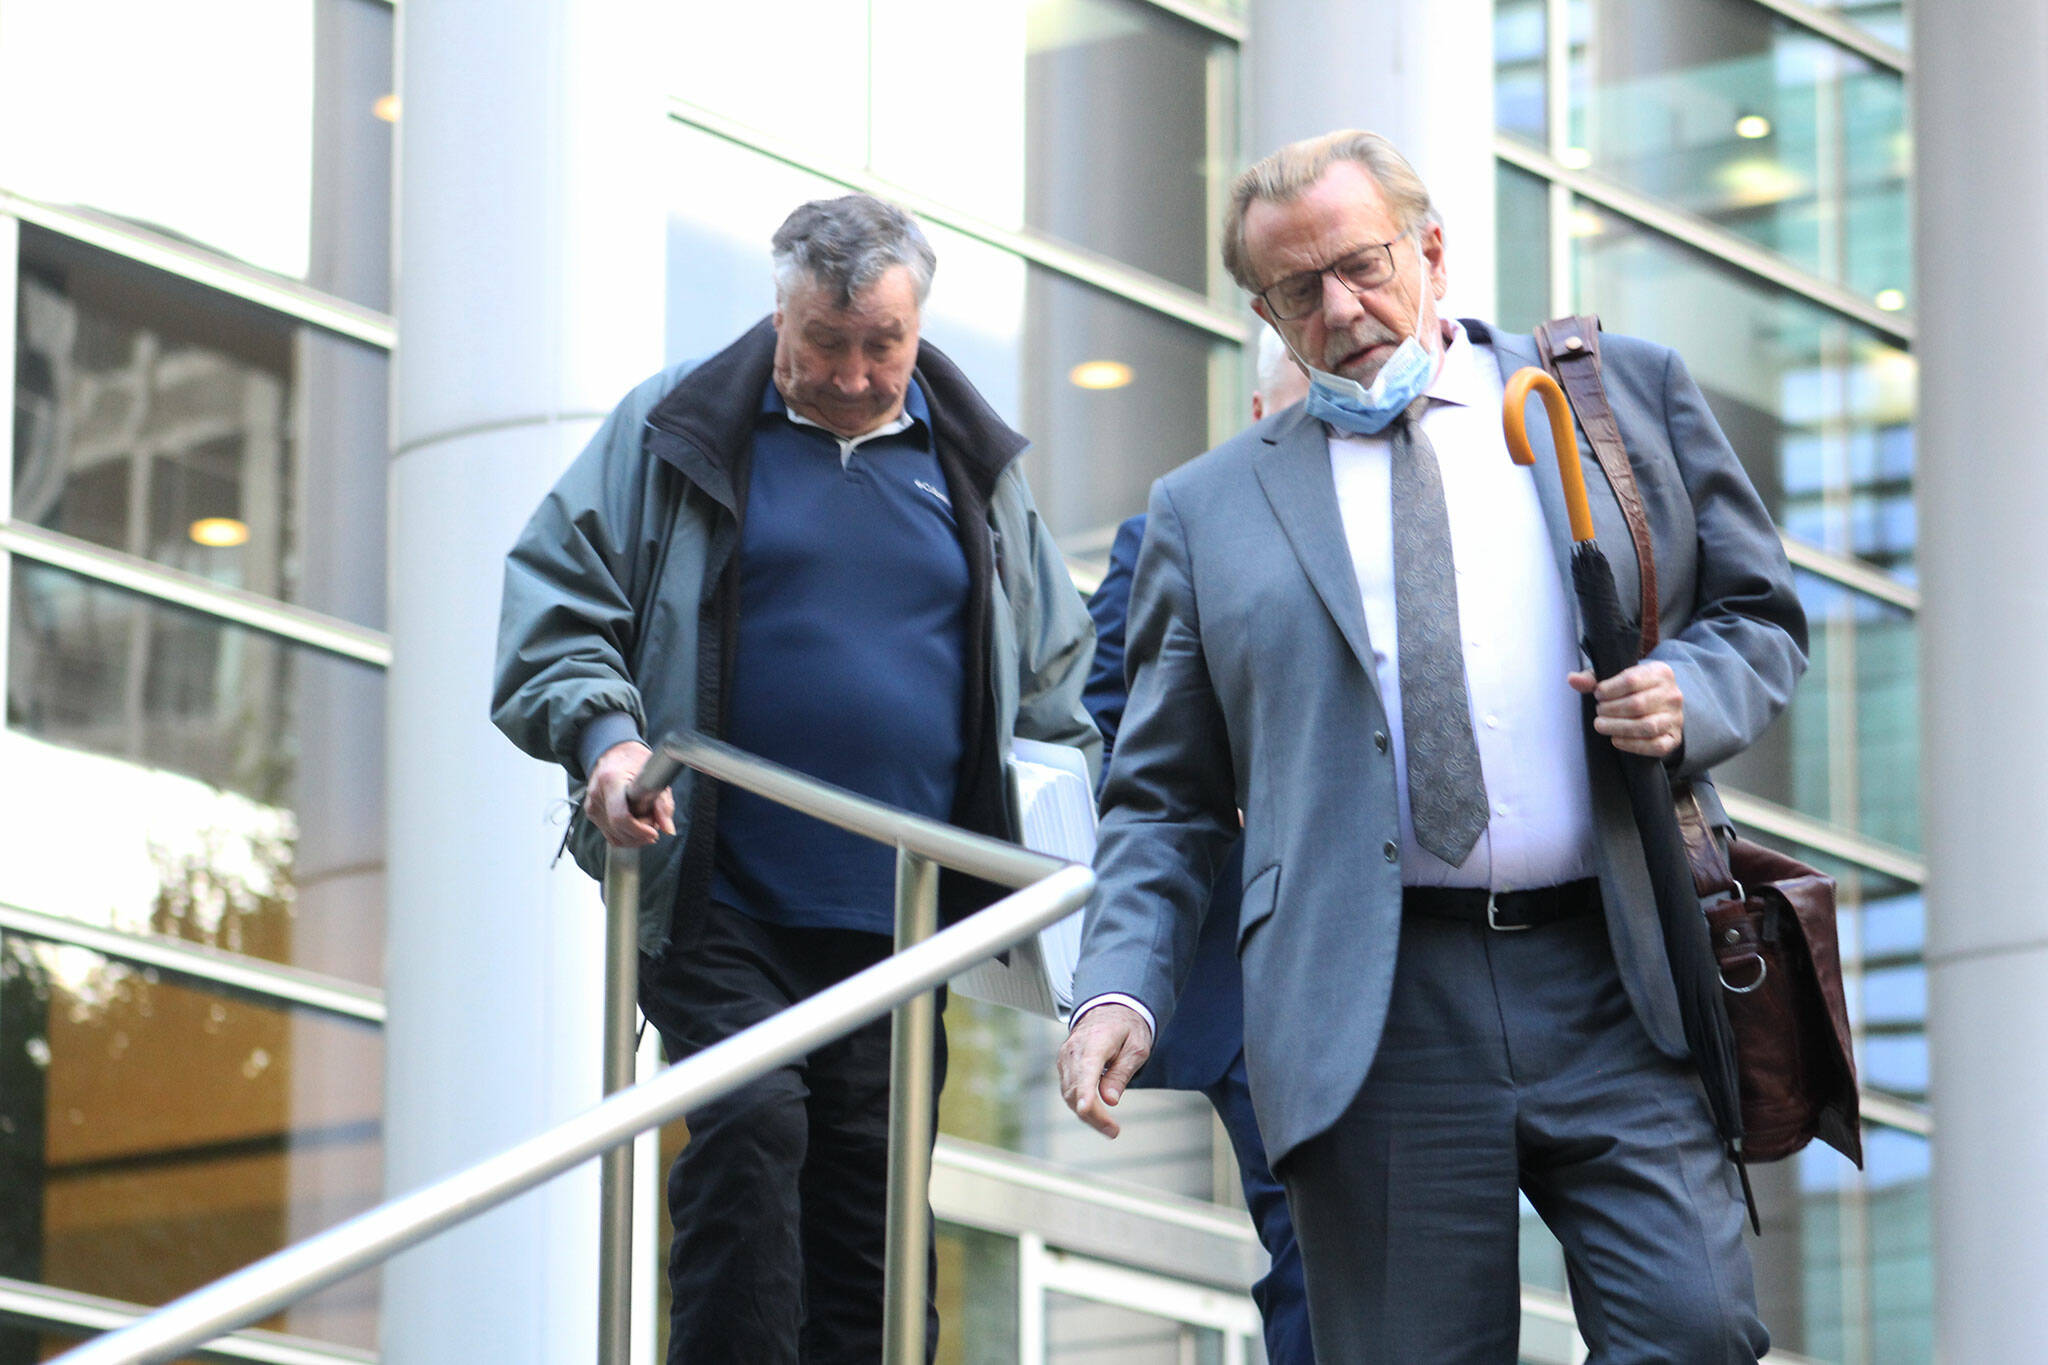 Allan Thomas and his attorney John Henry Browne exit the U.S. District Court building in Seattle following his conviction on several of the counts he was charged with in the drainage district trial. Photo by Ray Miller-Still